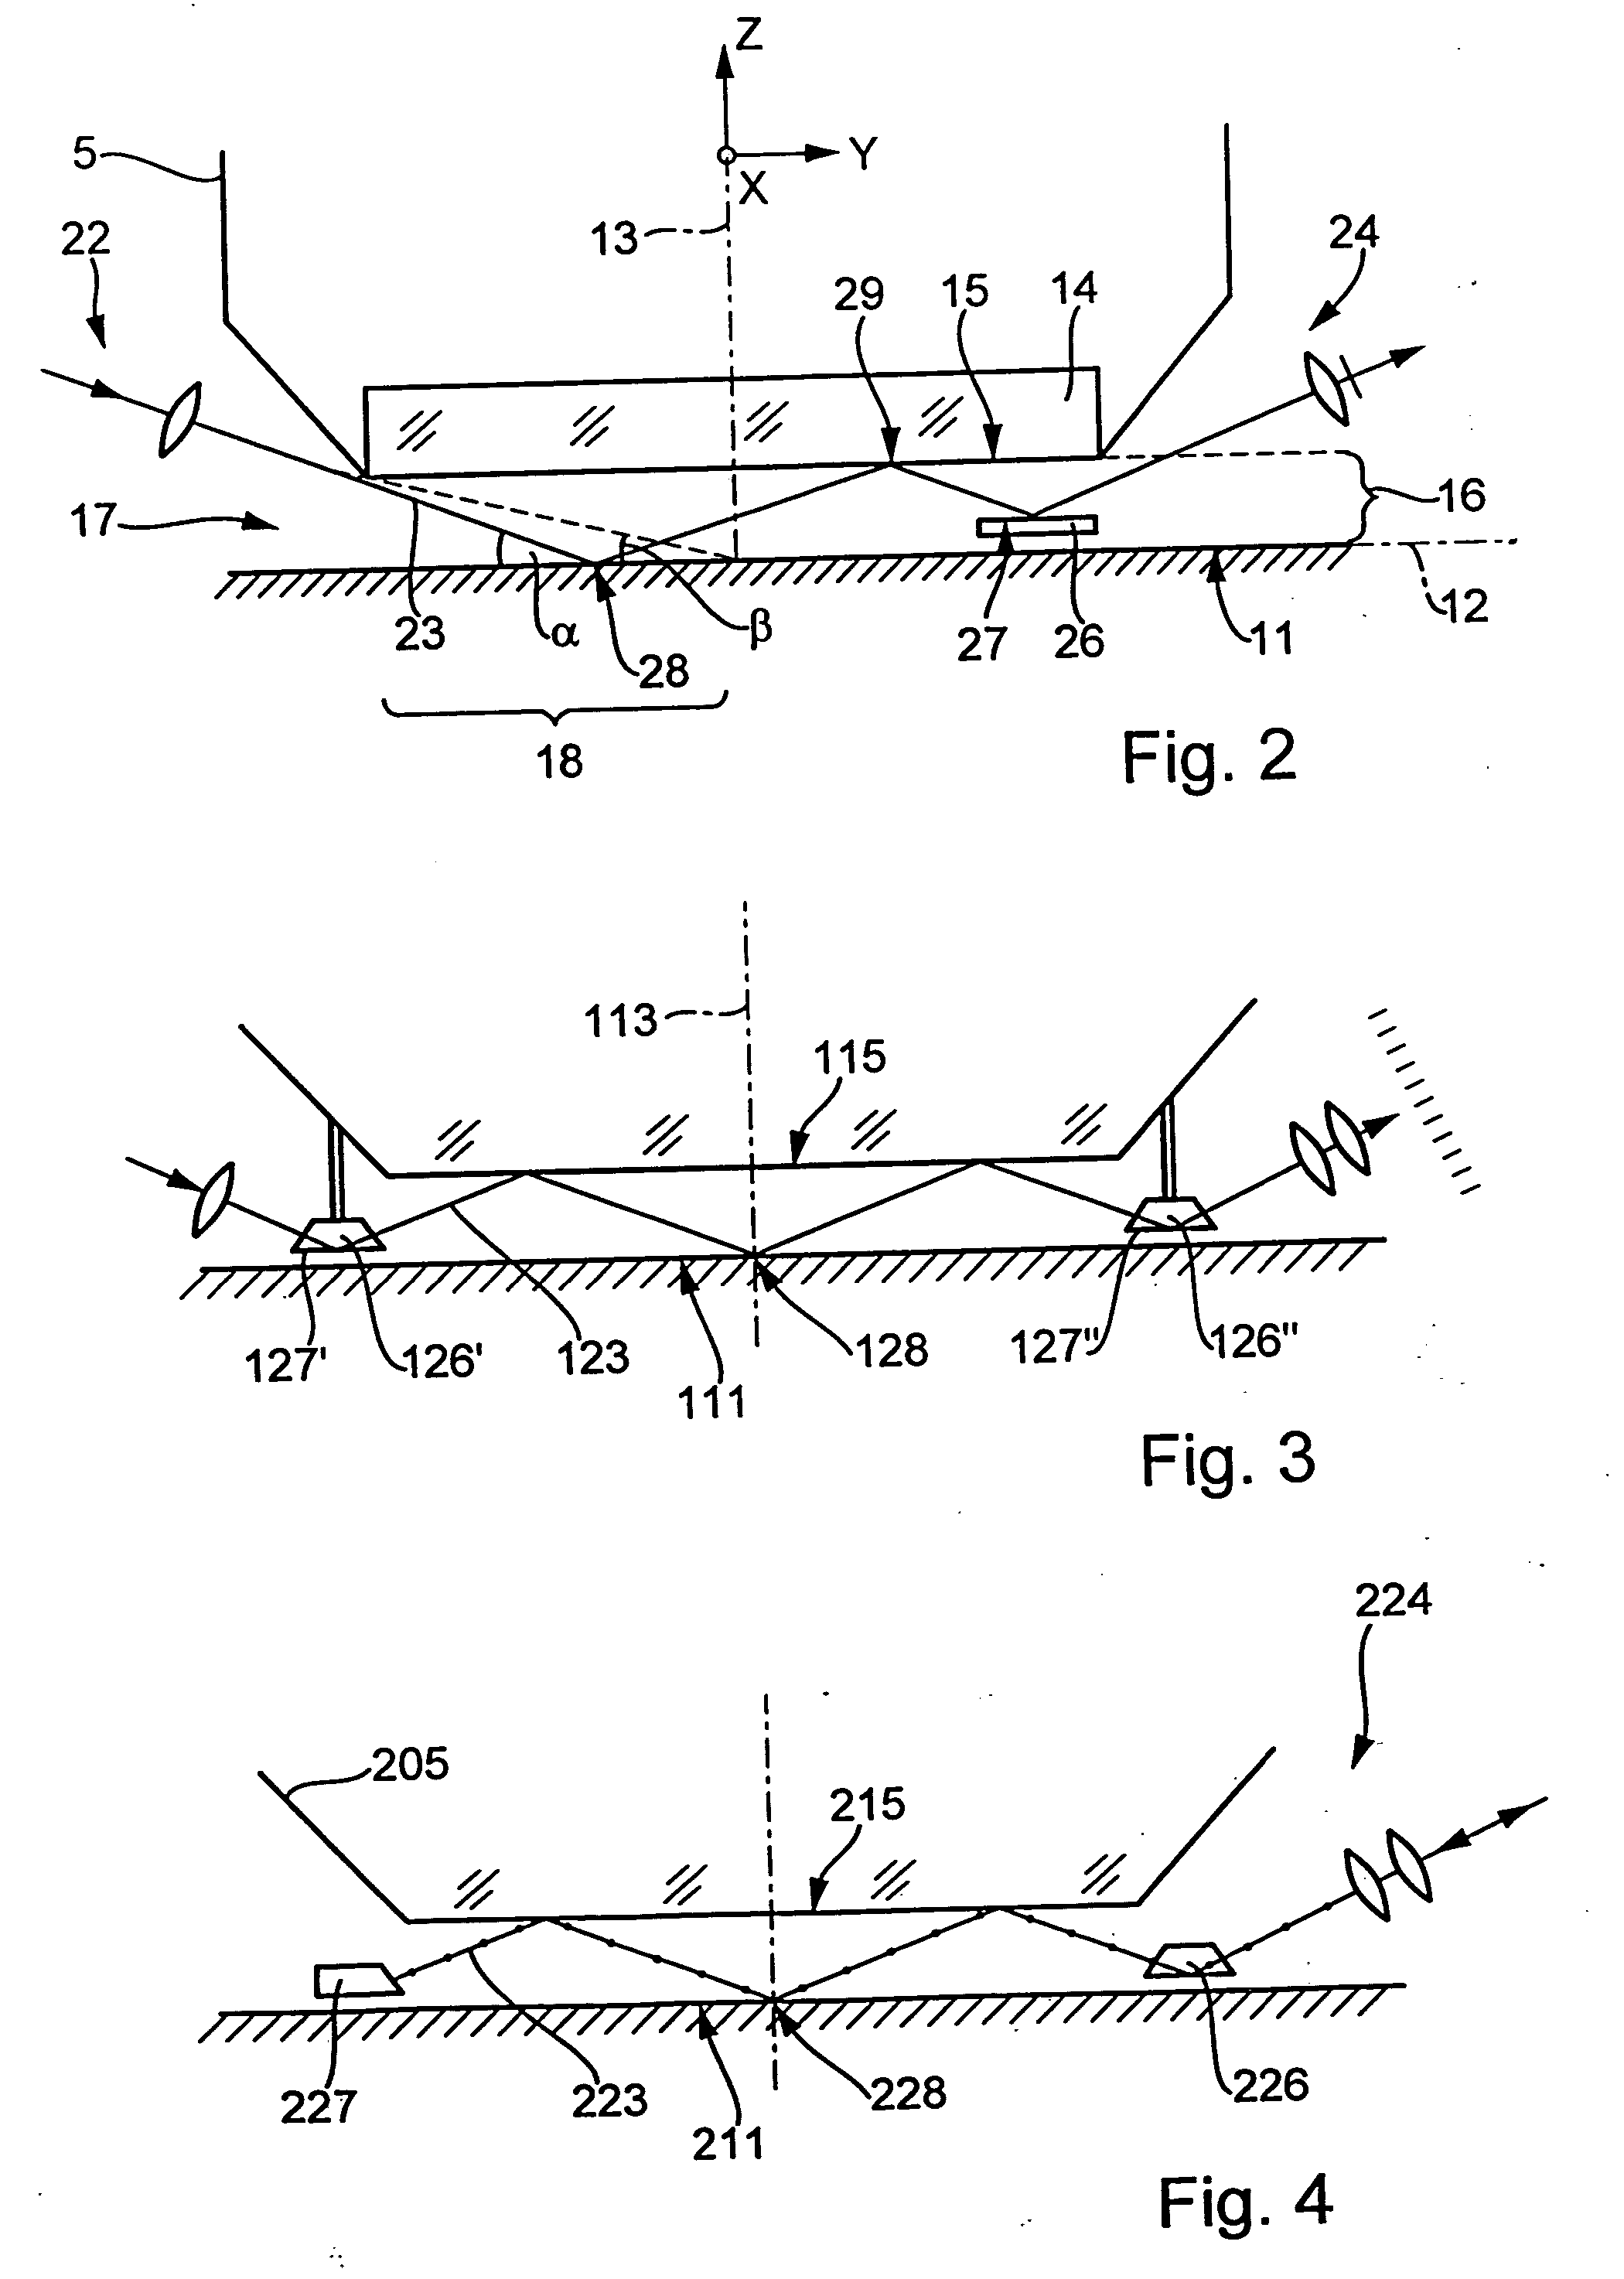 Method for optically detecting deviations of an image plane of an imaging system from the surface of a substrate